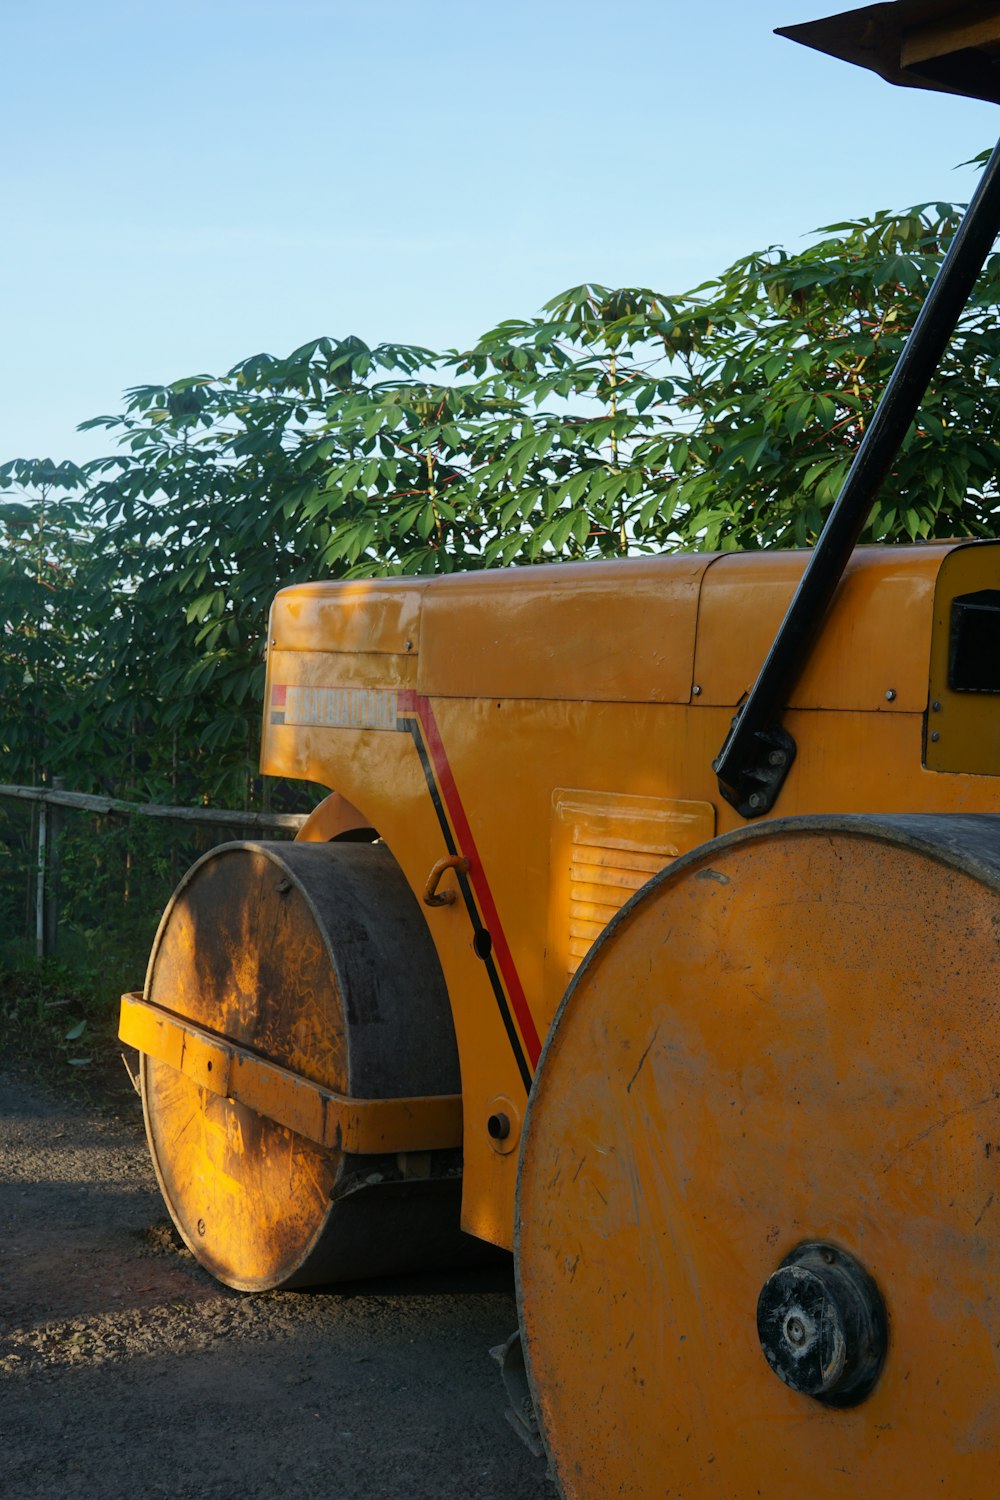 a close up of a yellow machine near a fence